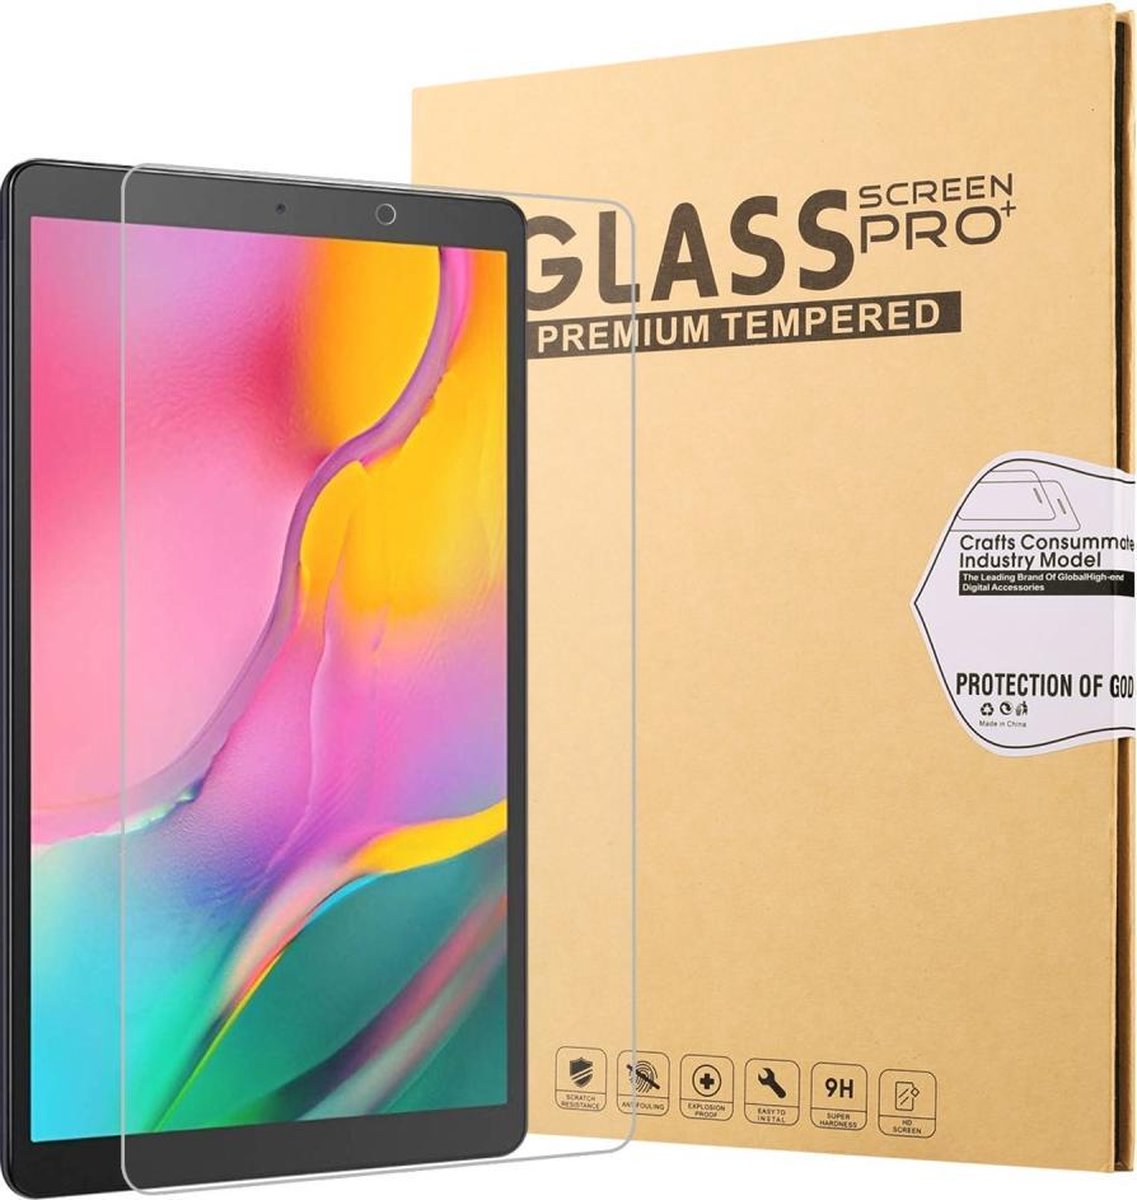 Tempered Glass screenprotector voor Samsung Galaxy Tab A 10.1 T510 / T515 (2019)